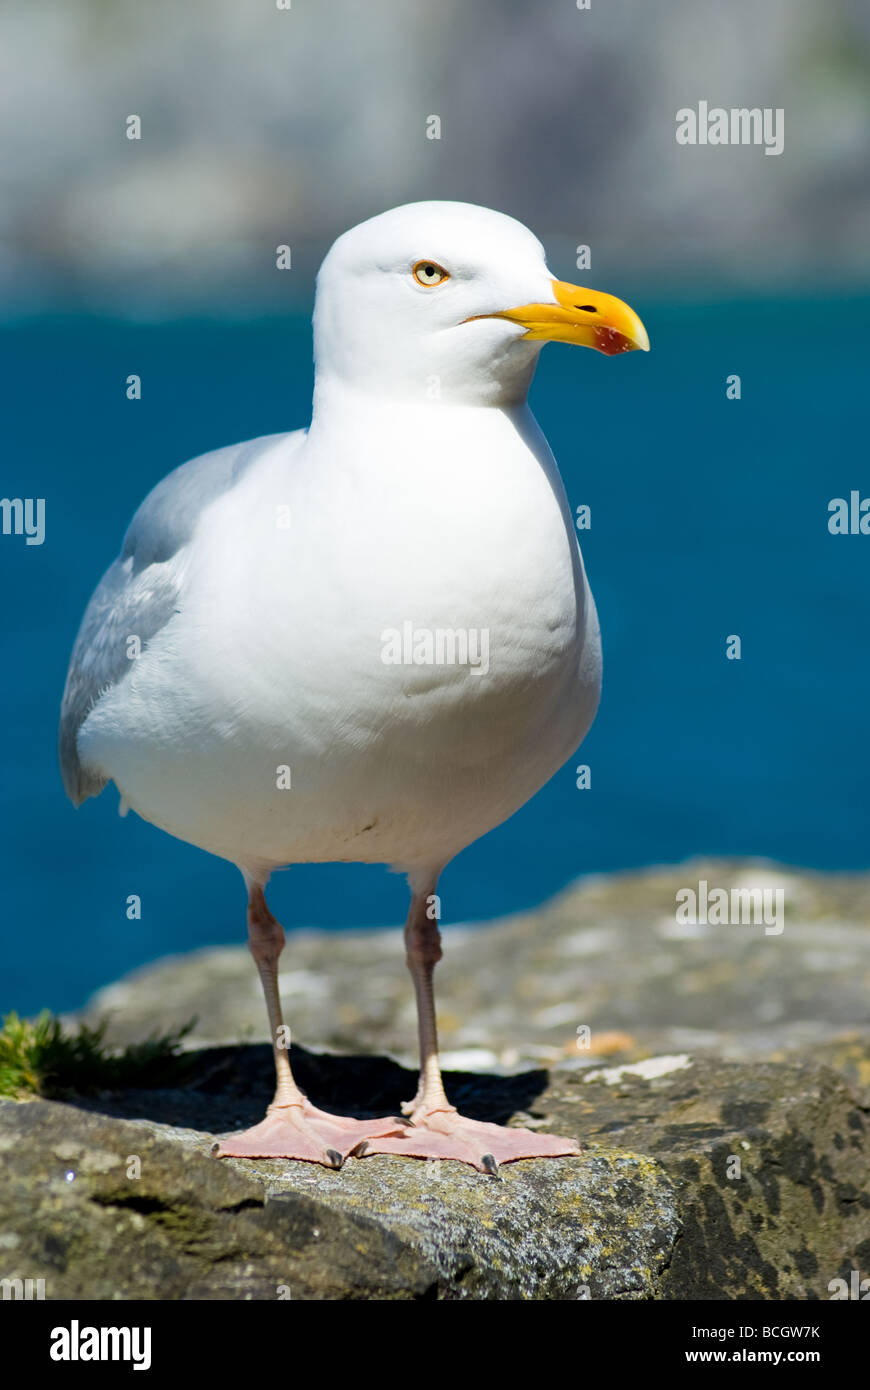 A seagull perched on a wall on the Dingle peninsula, County Kerry, Ireland Stock Photo